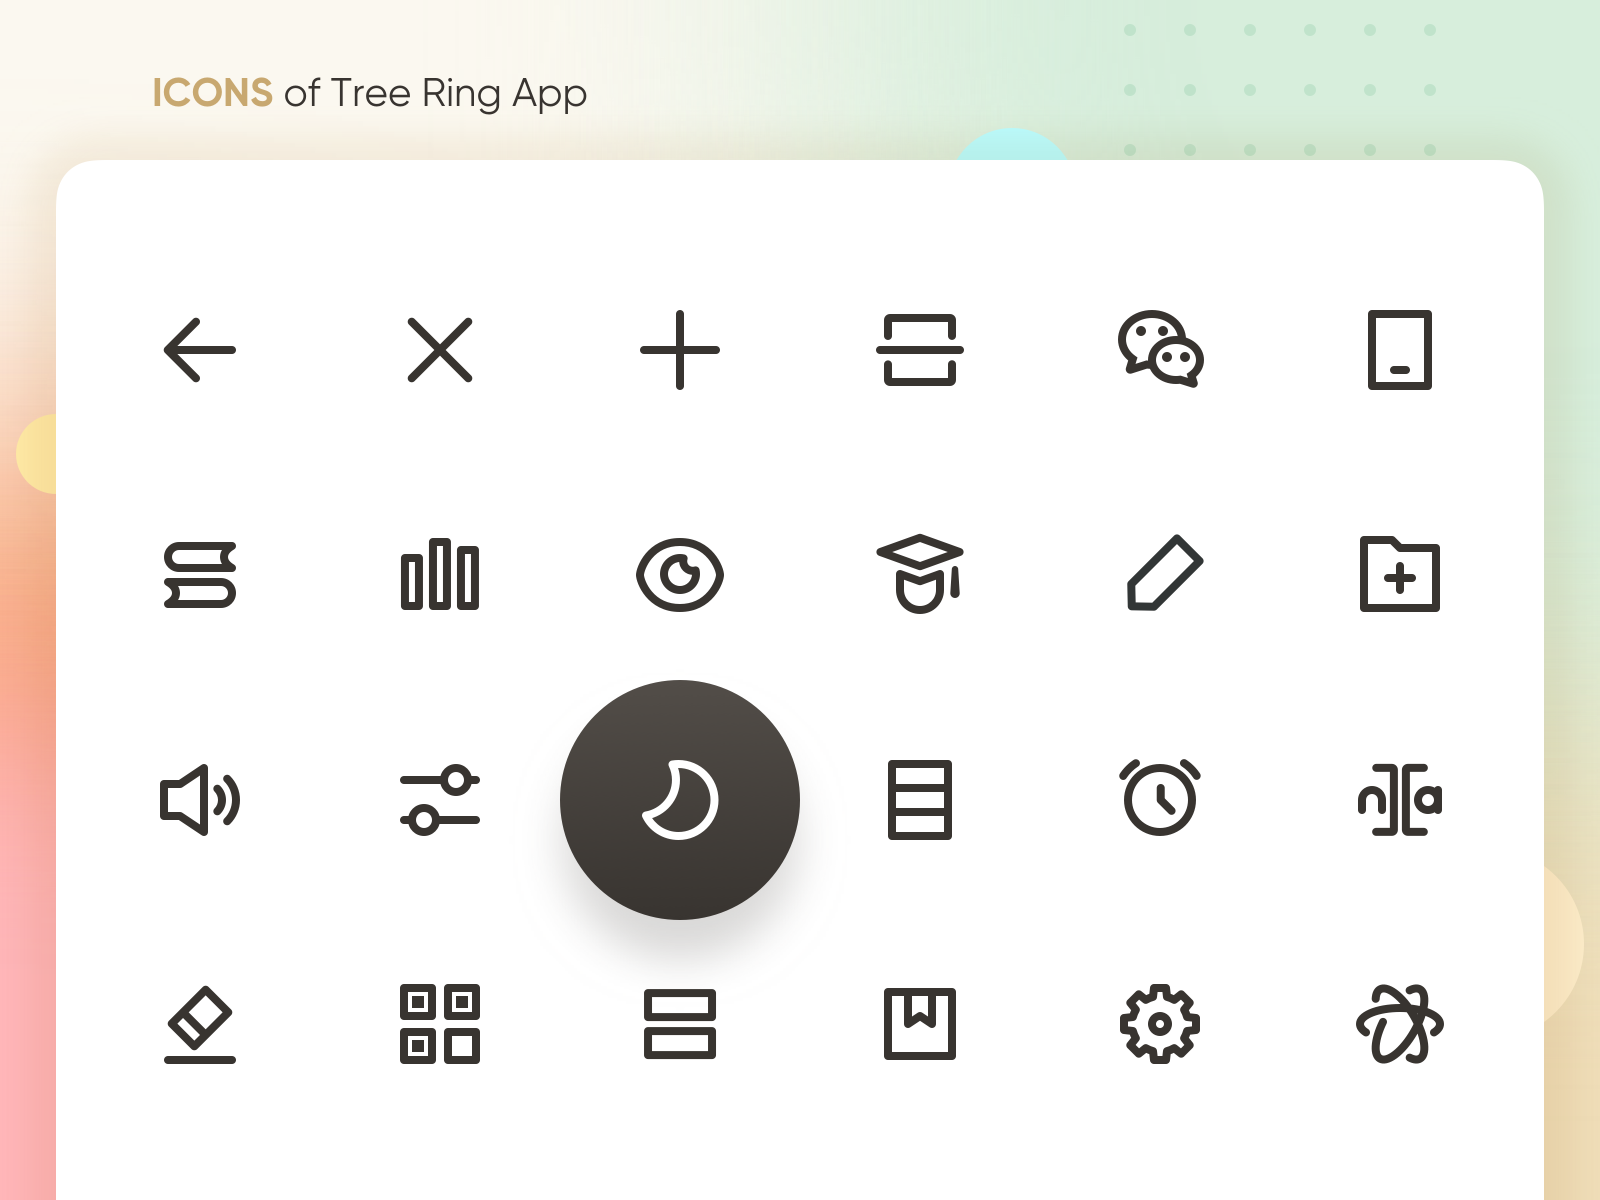 ICONS of Tree Ring App